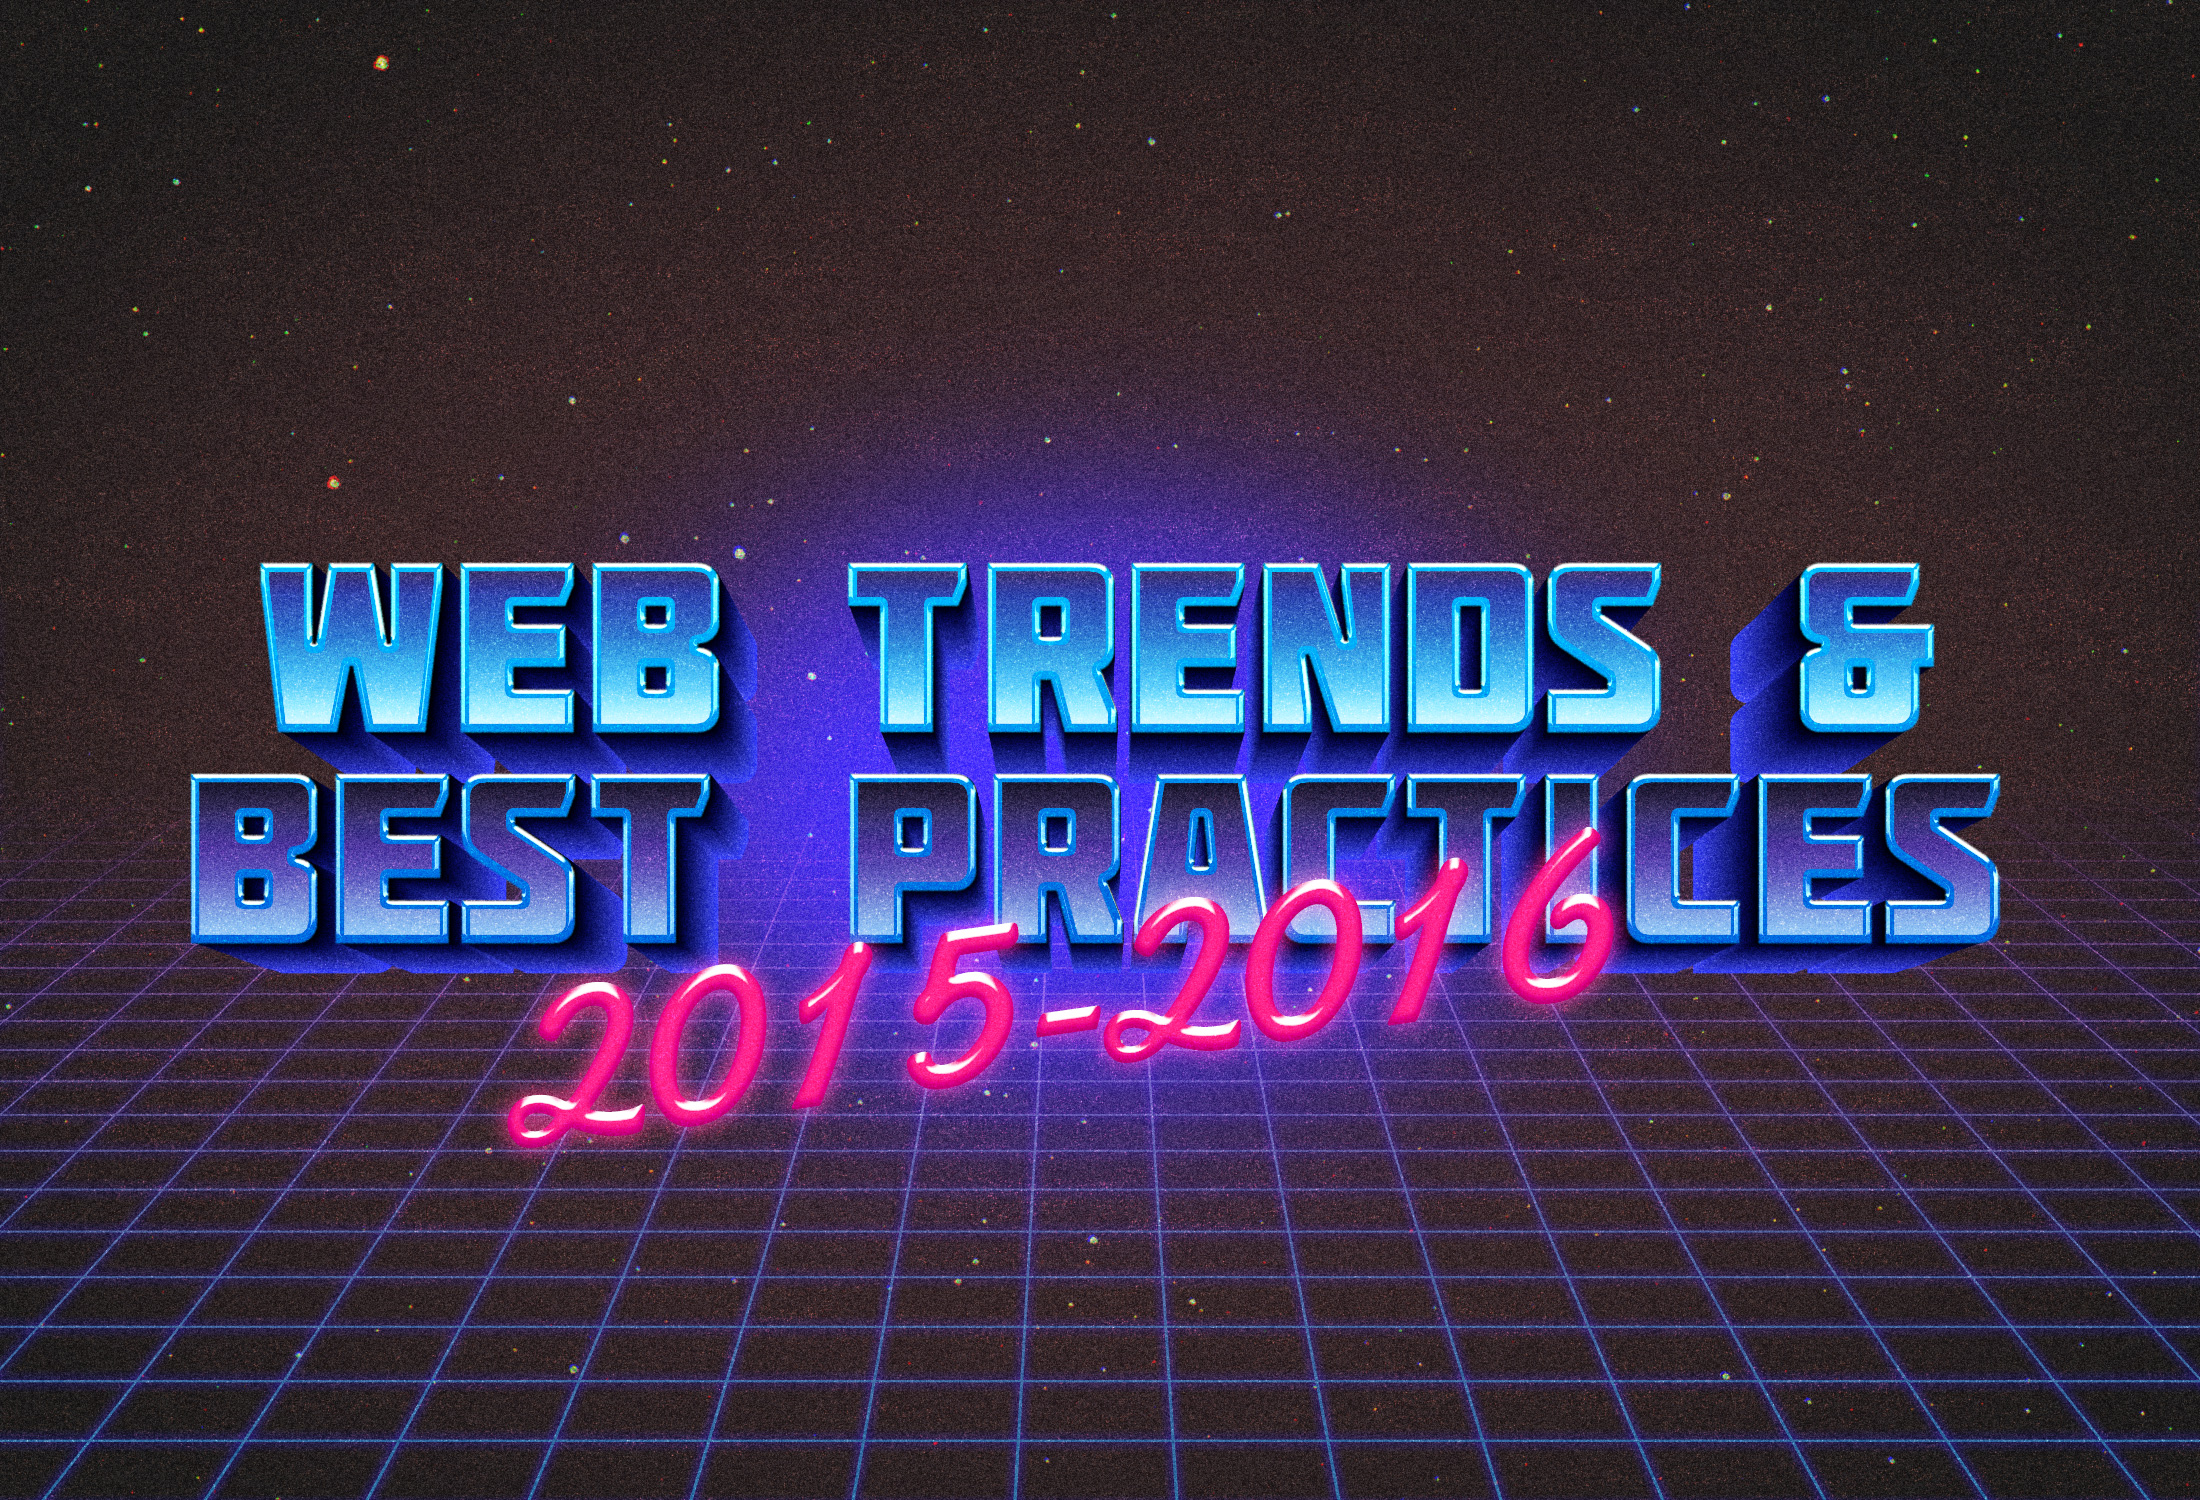 Web Trends and Best Practices 2015-2016